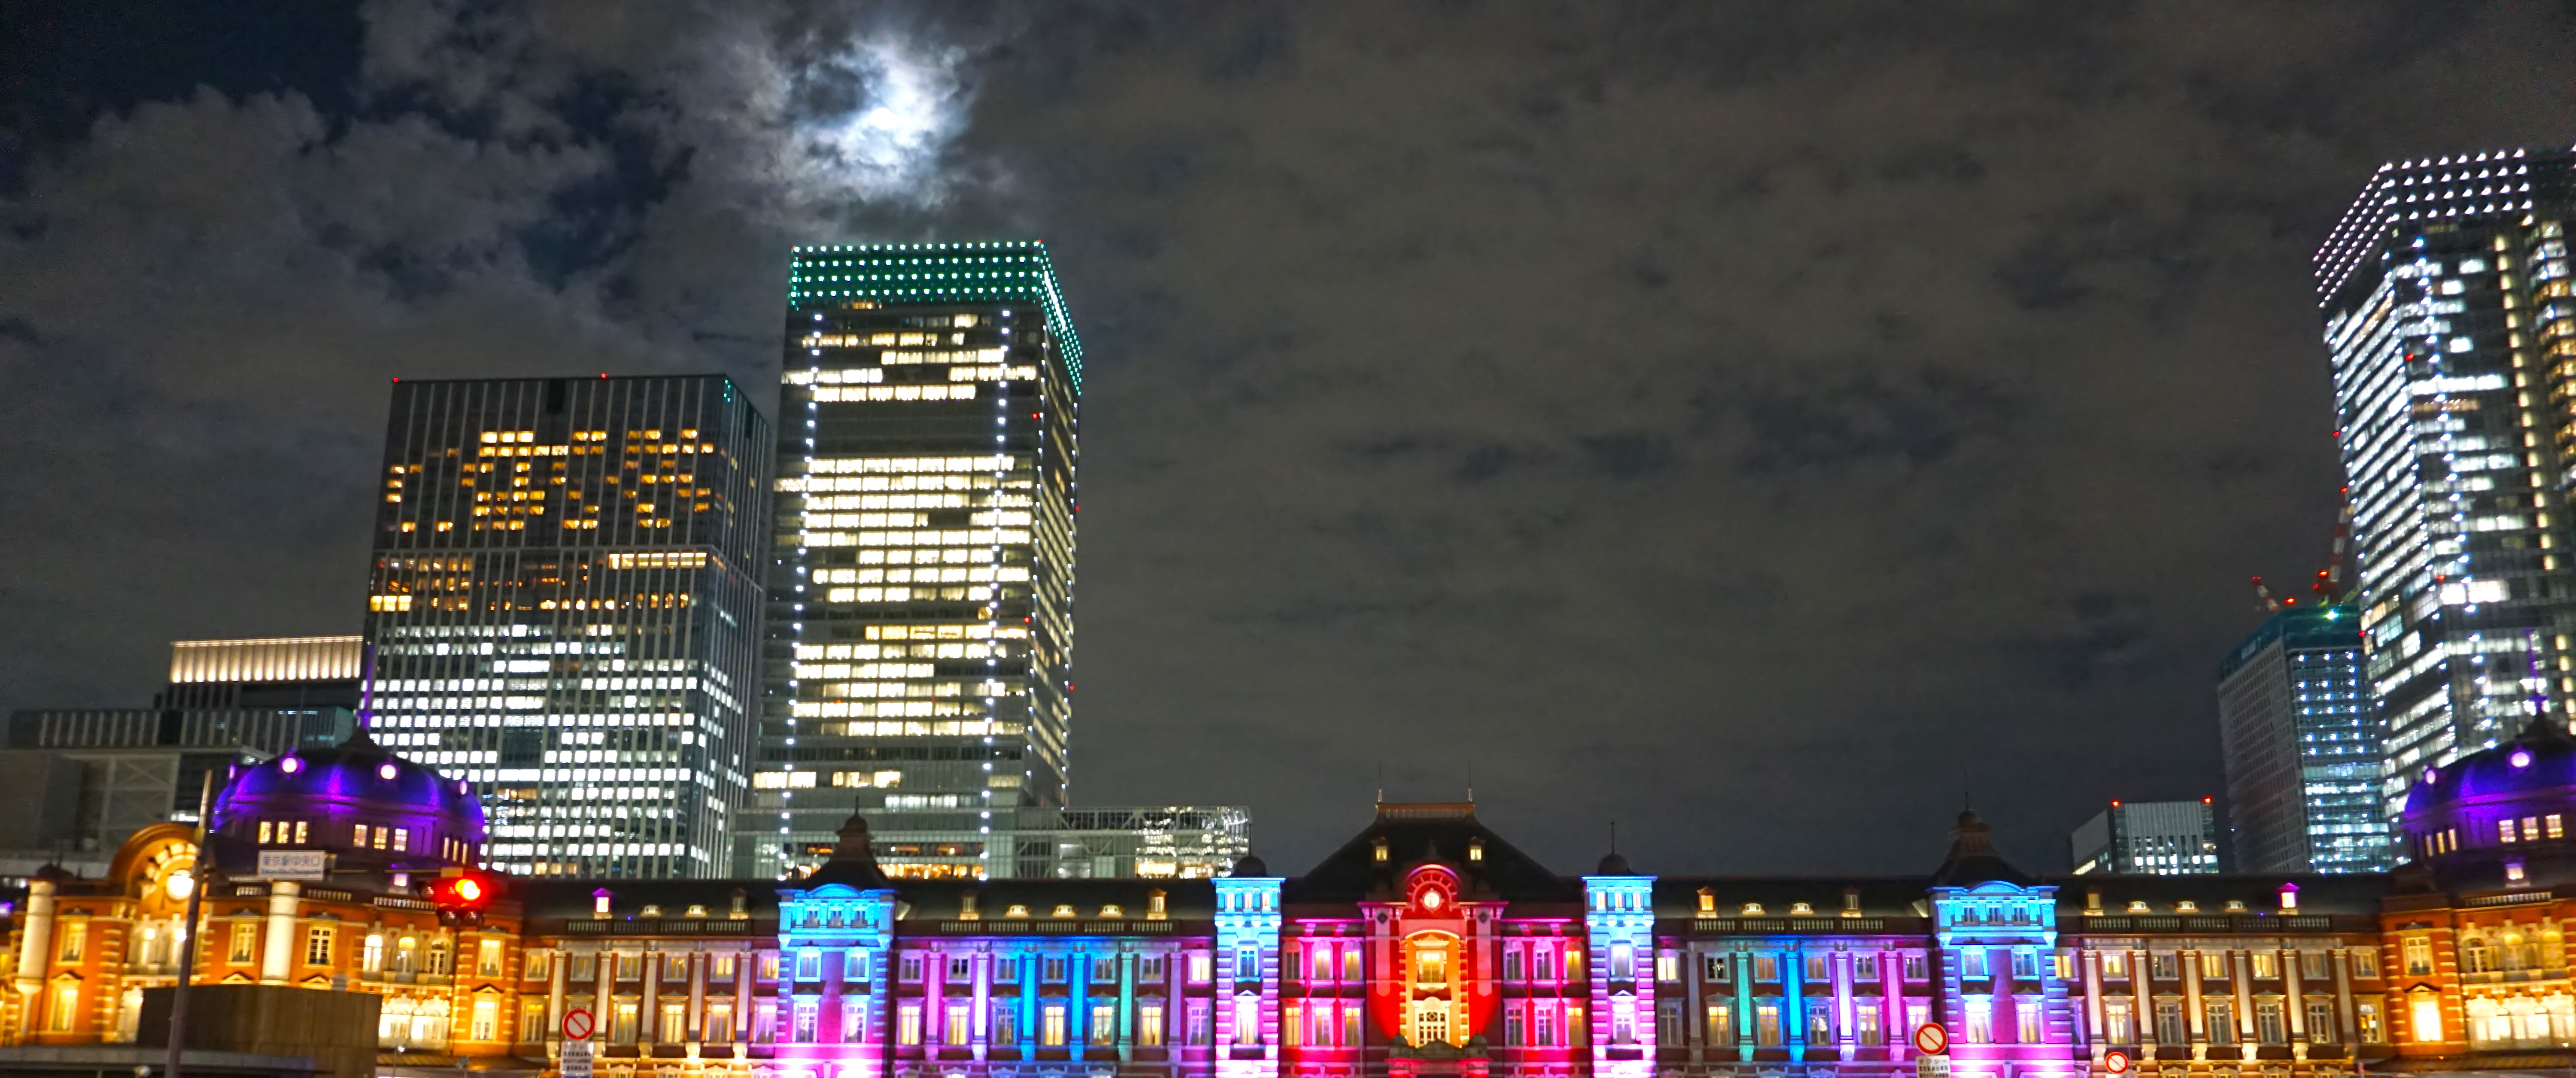 File Tokyo Station Special Lighting Of Michi Terrace 15 東京駅 道テラス15 ライトアップ Jpg Wikimedia Commons